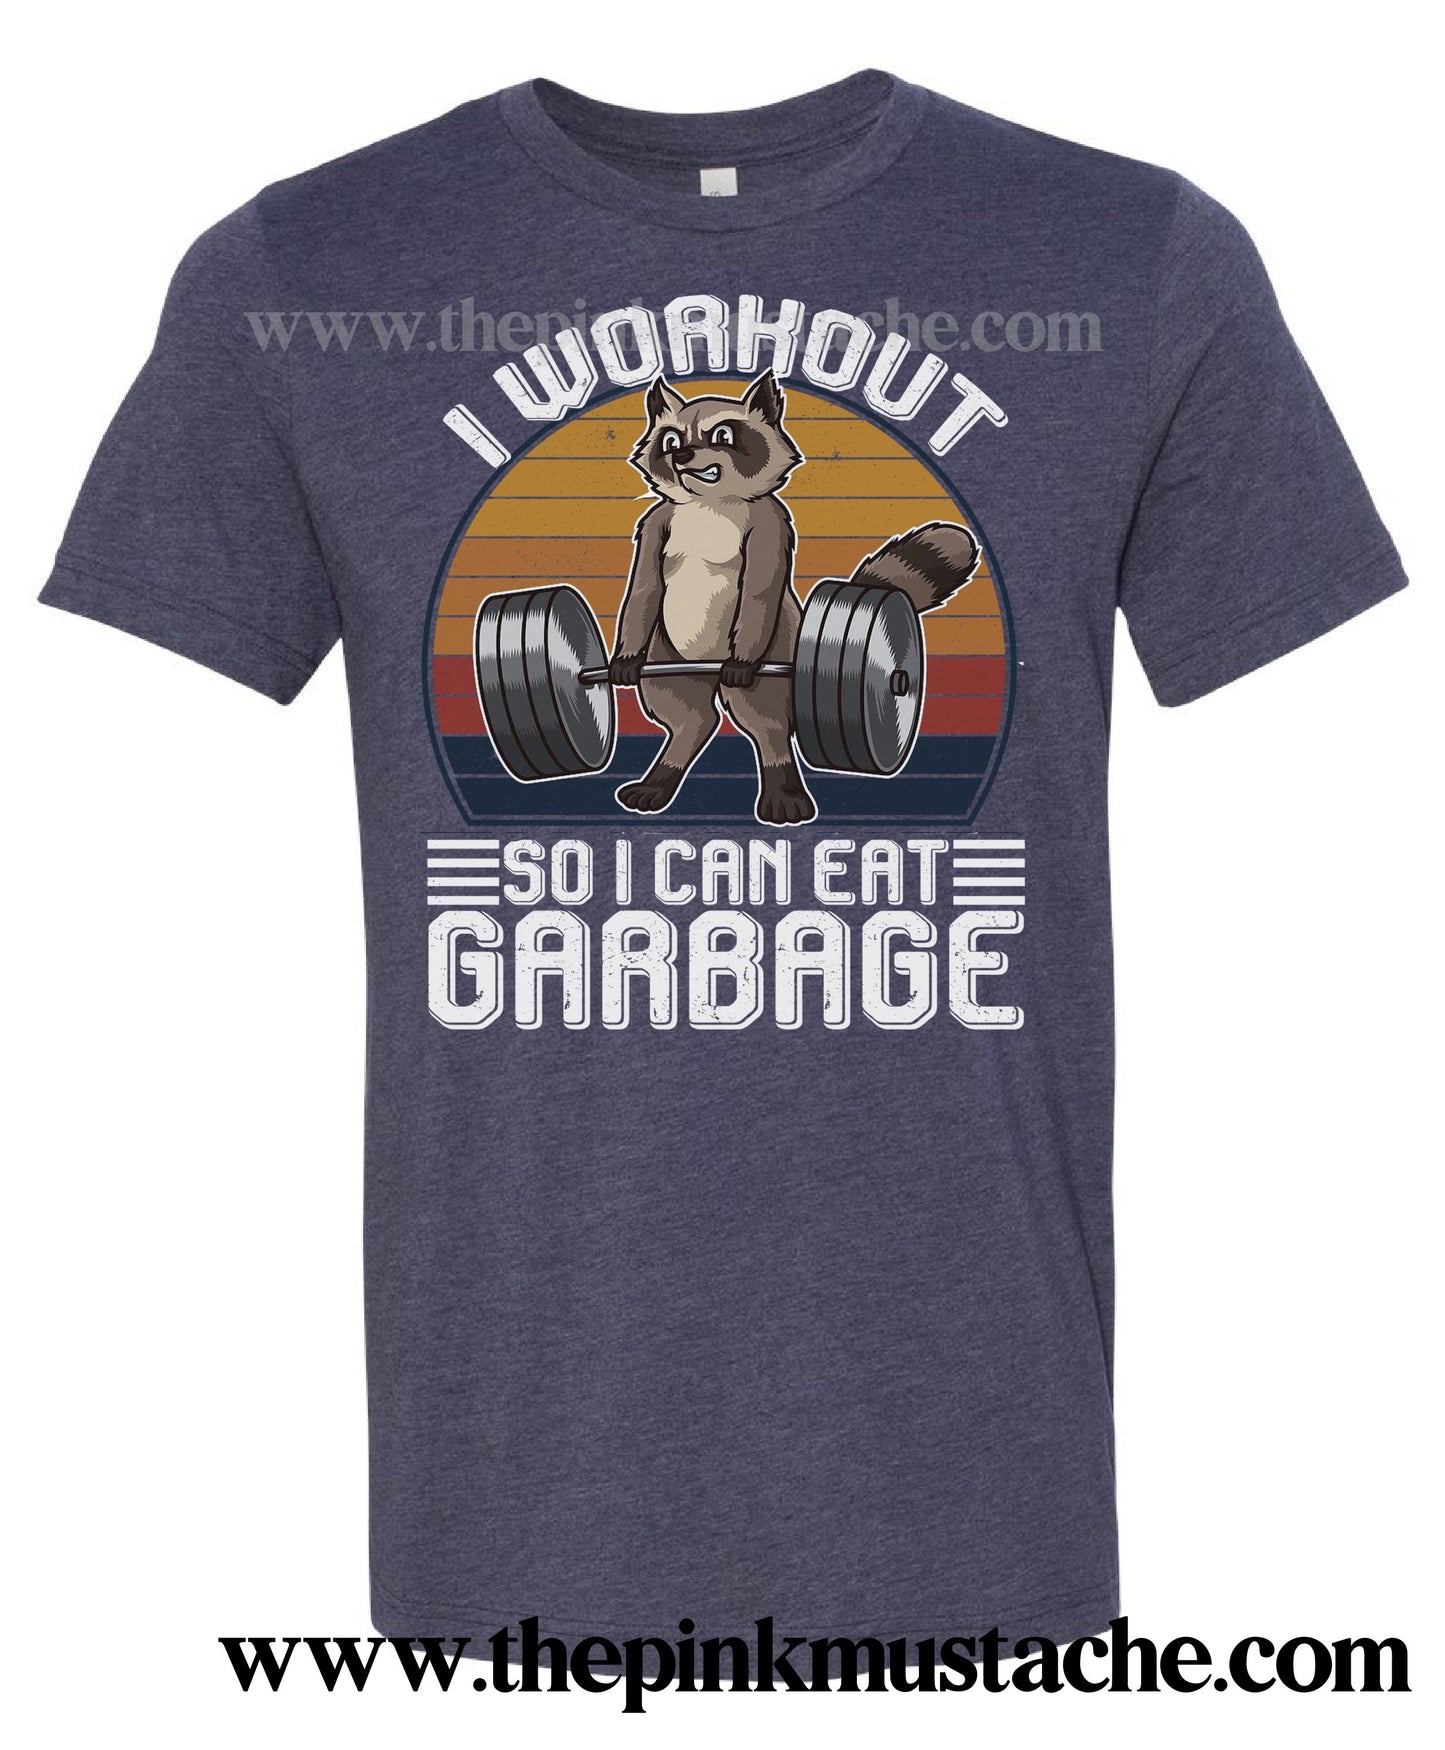 I Workout So I Can Eat Garbage Unisex Tee / Workout / Fitness Tee/ Crossfit Tee